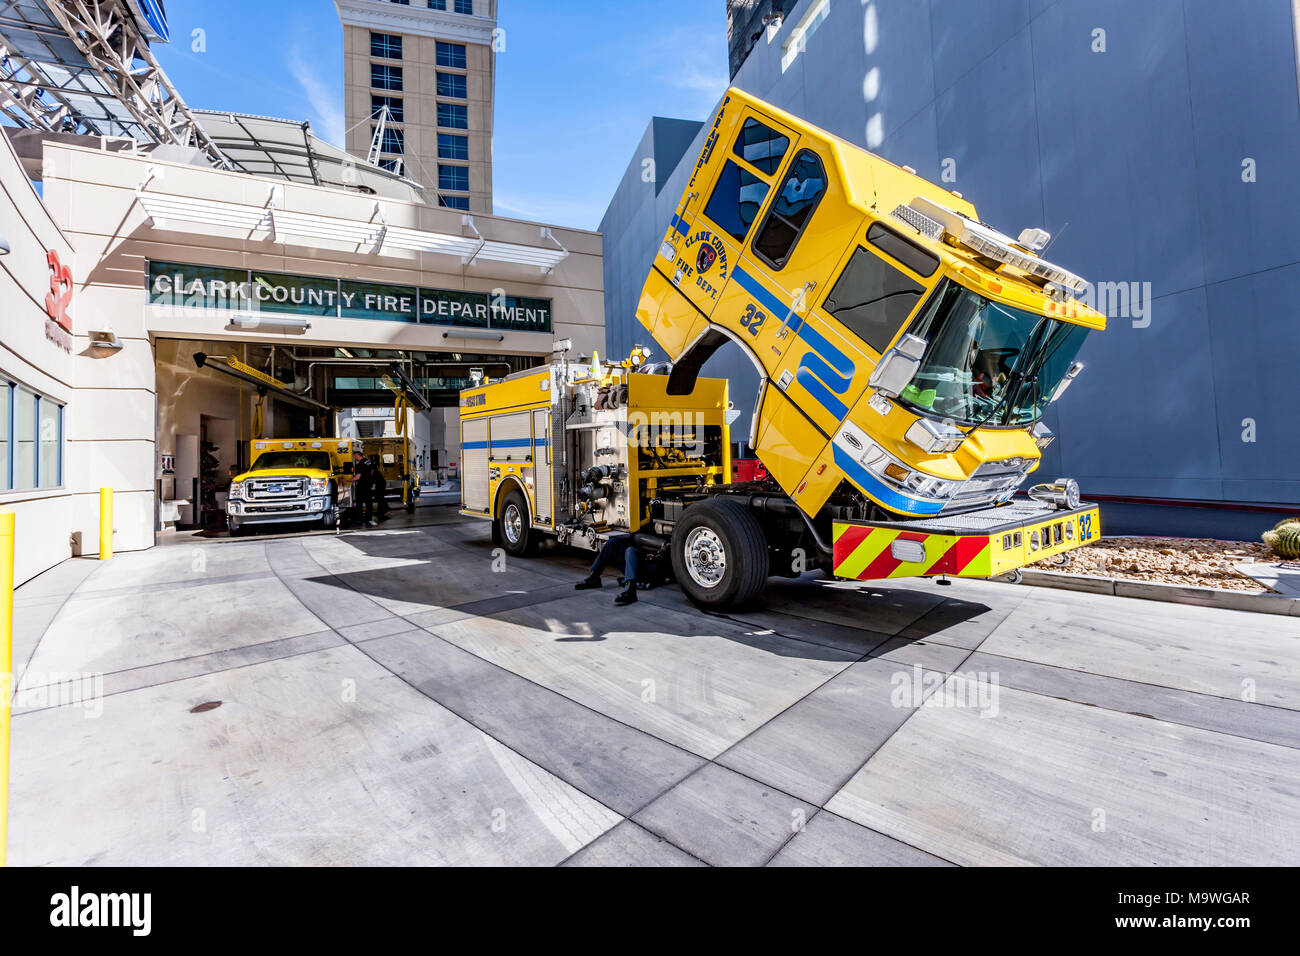 Clark County Fire Department, Fire truck parked up near the Vdara hotel and spar, Las Vegas, U.S.A. Stock Photo